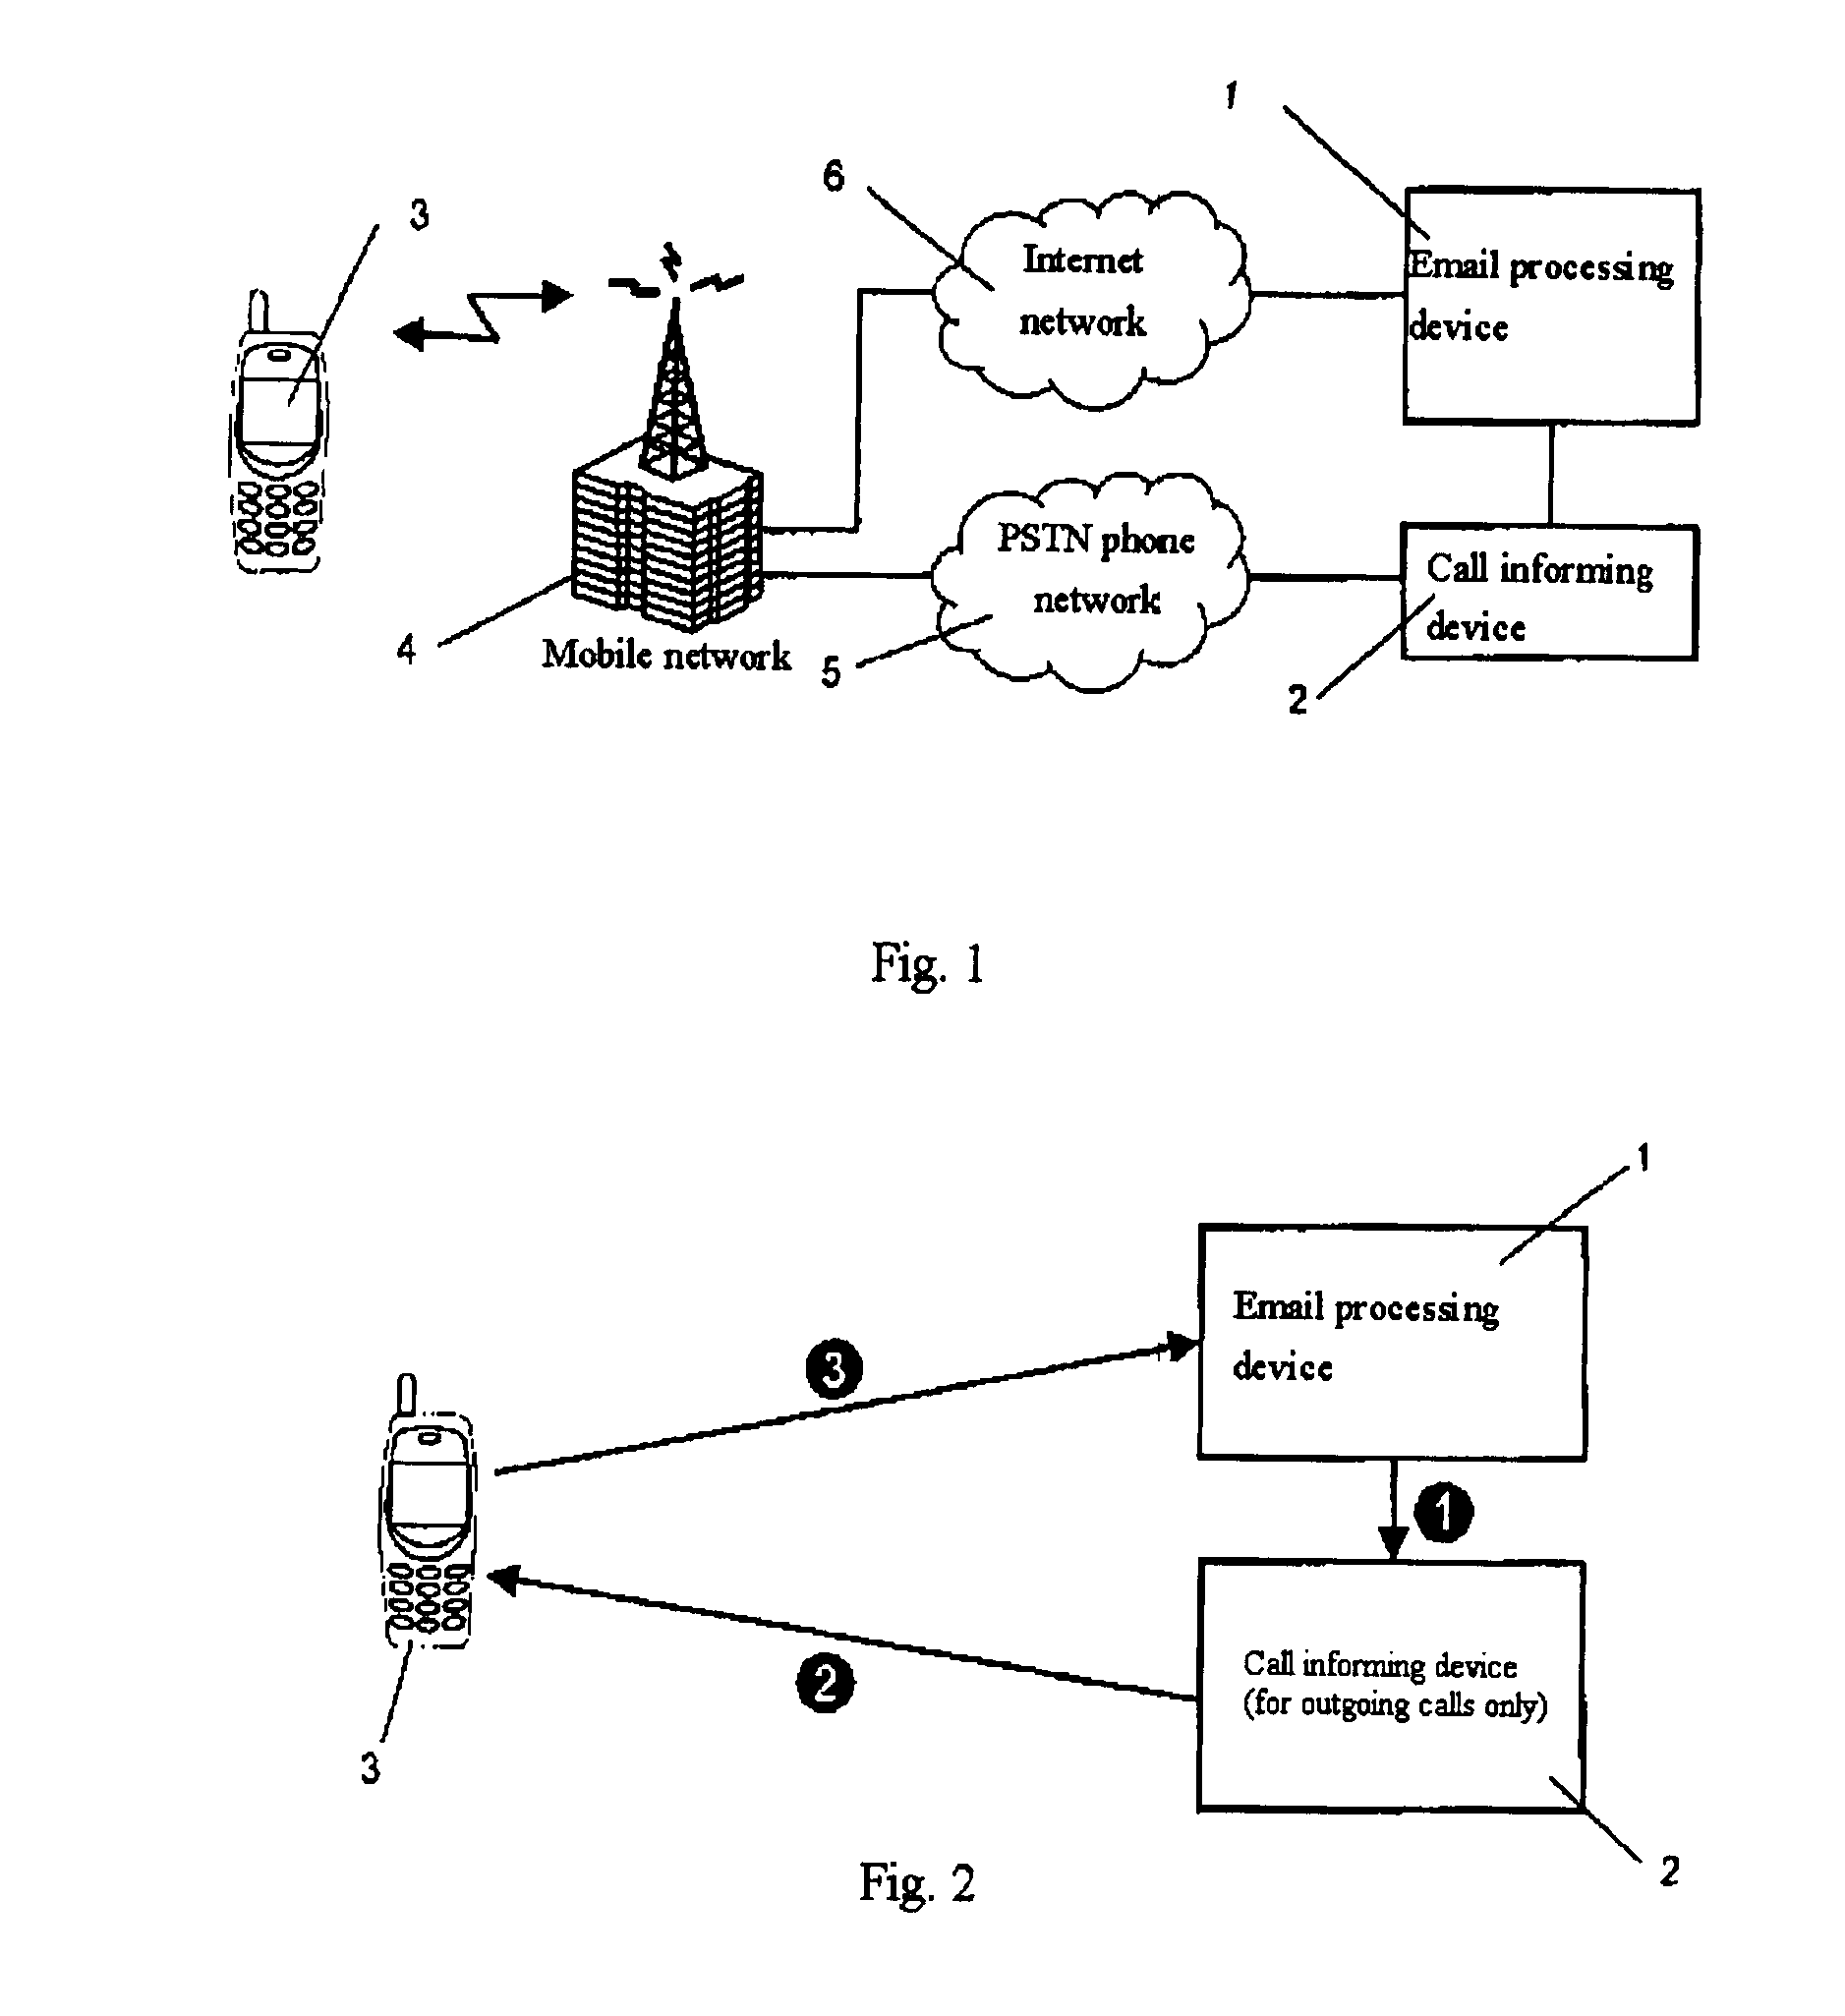 System and method for informing a user of the arrival of an email at an email server via mobile phone